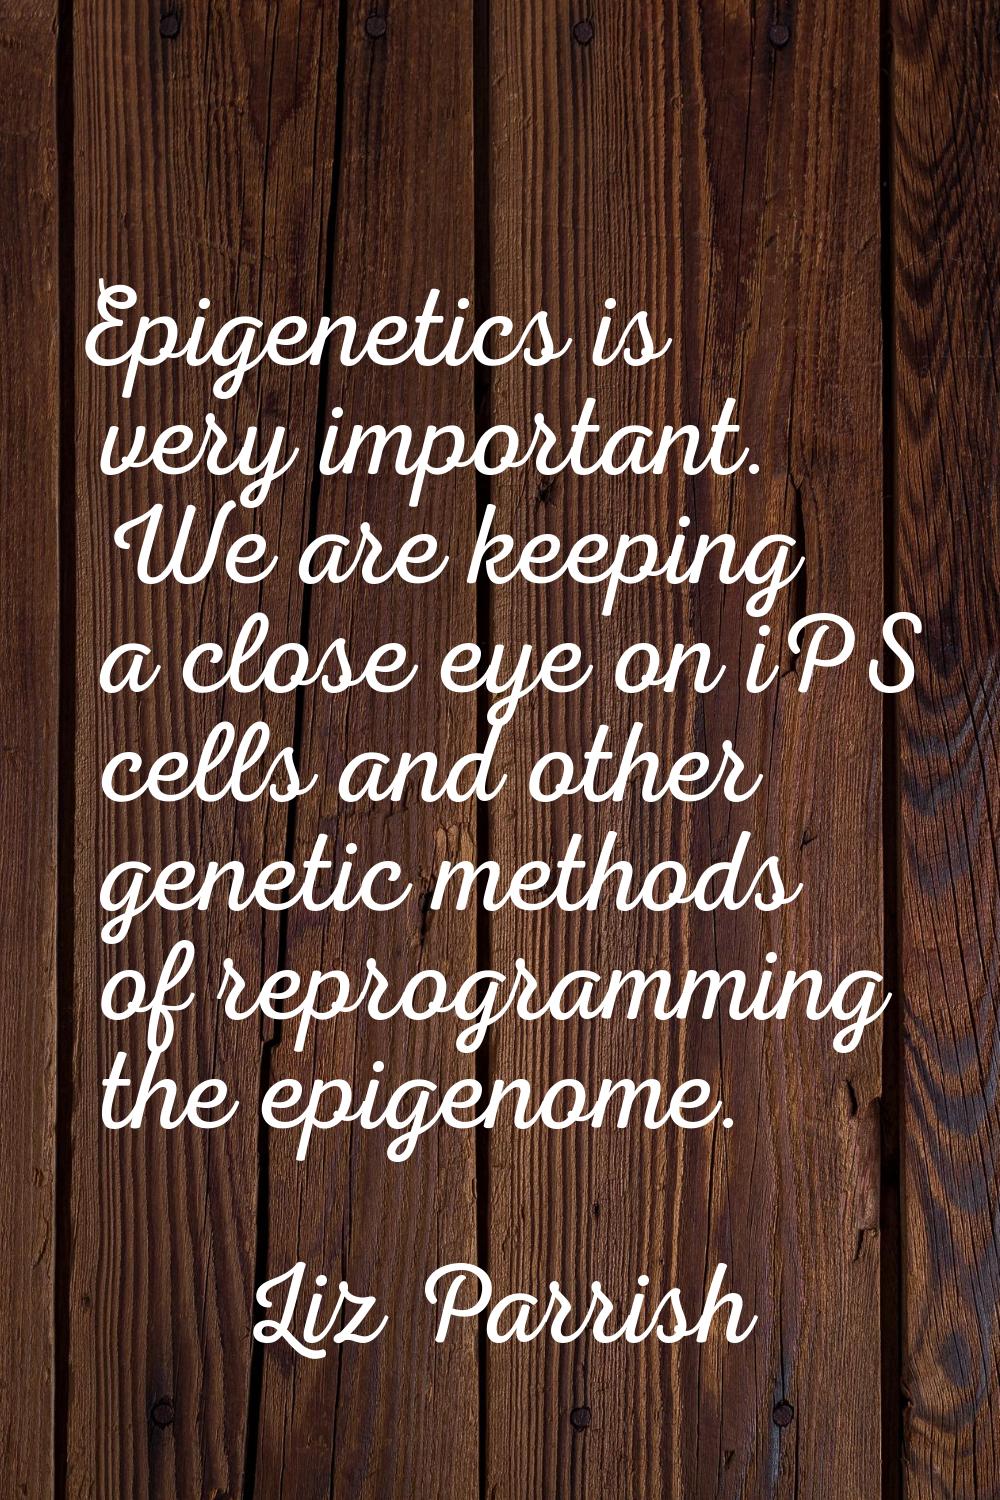 Epigenetics is very important. We are keeping a close eye on iPS cells and other genetic methods of